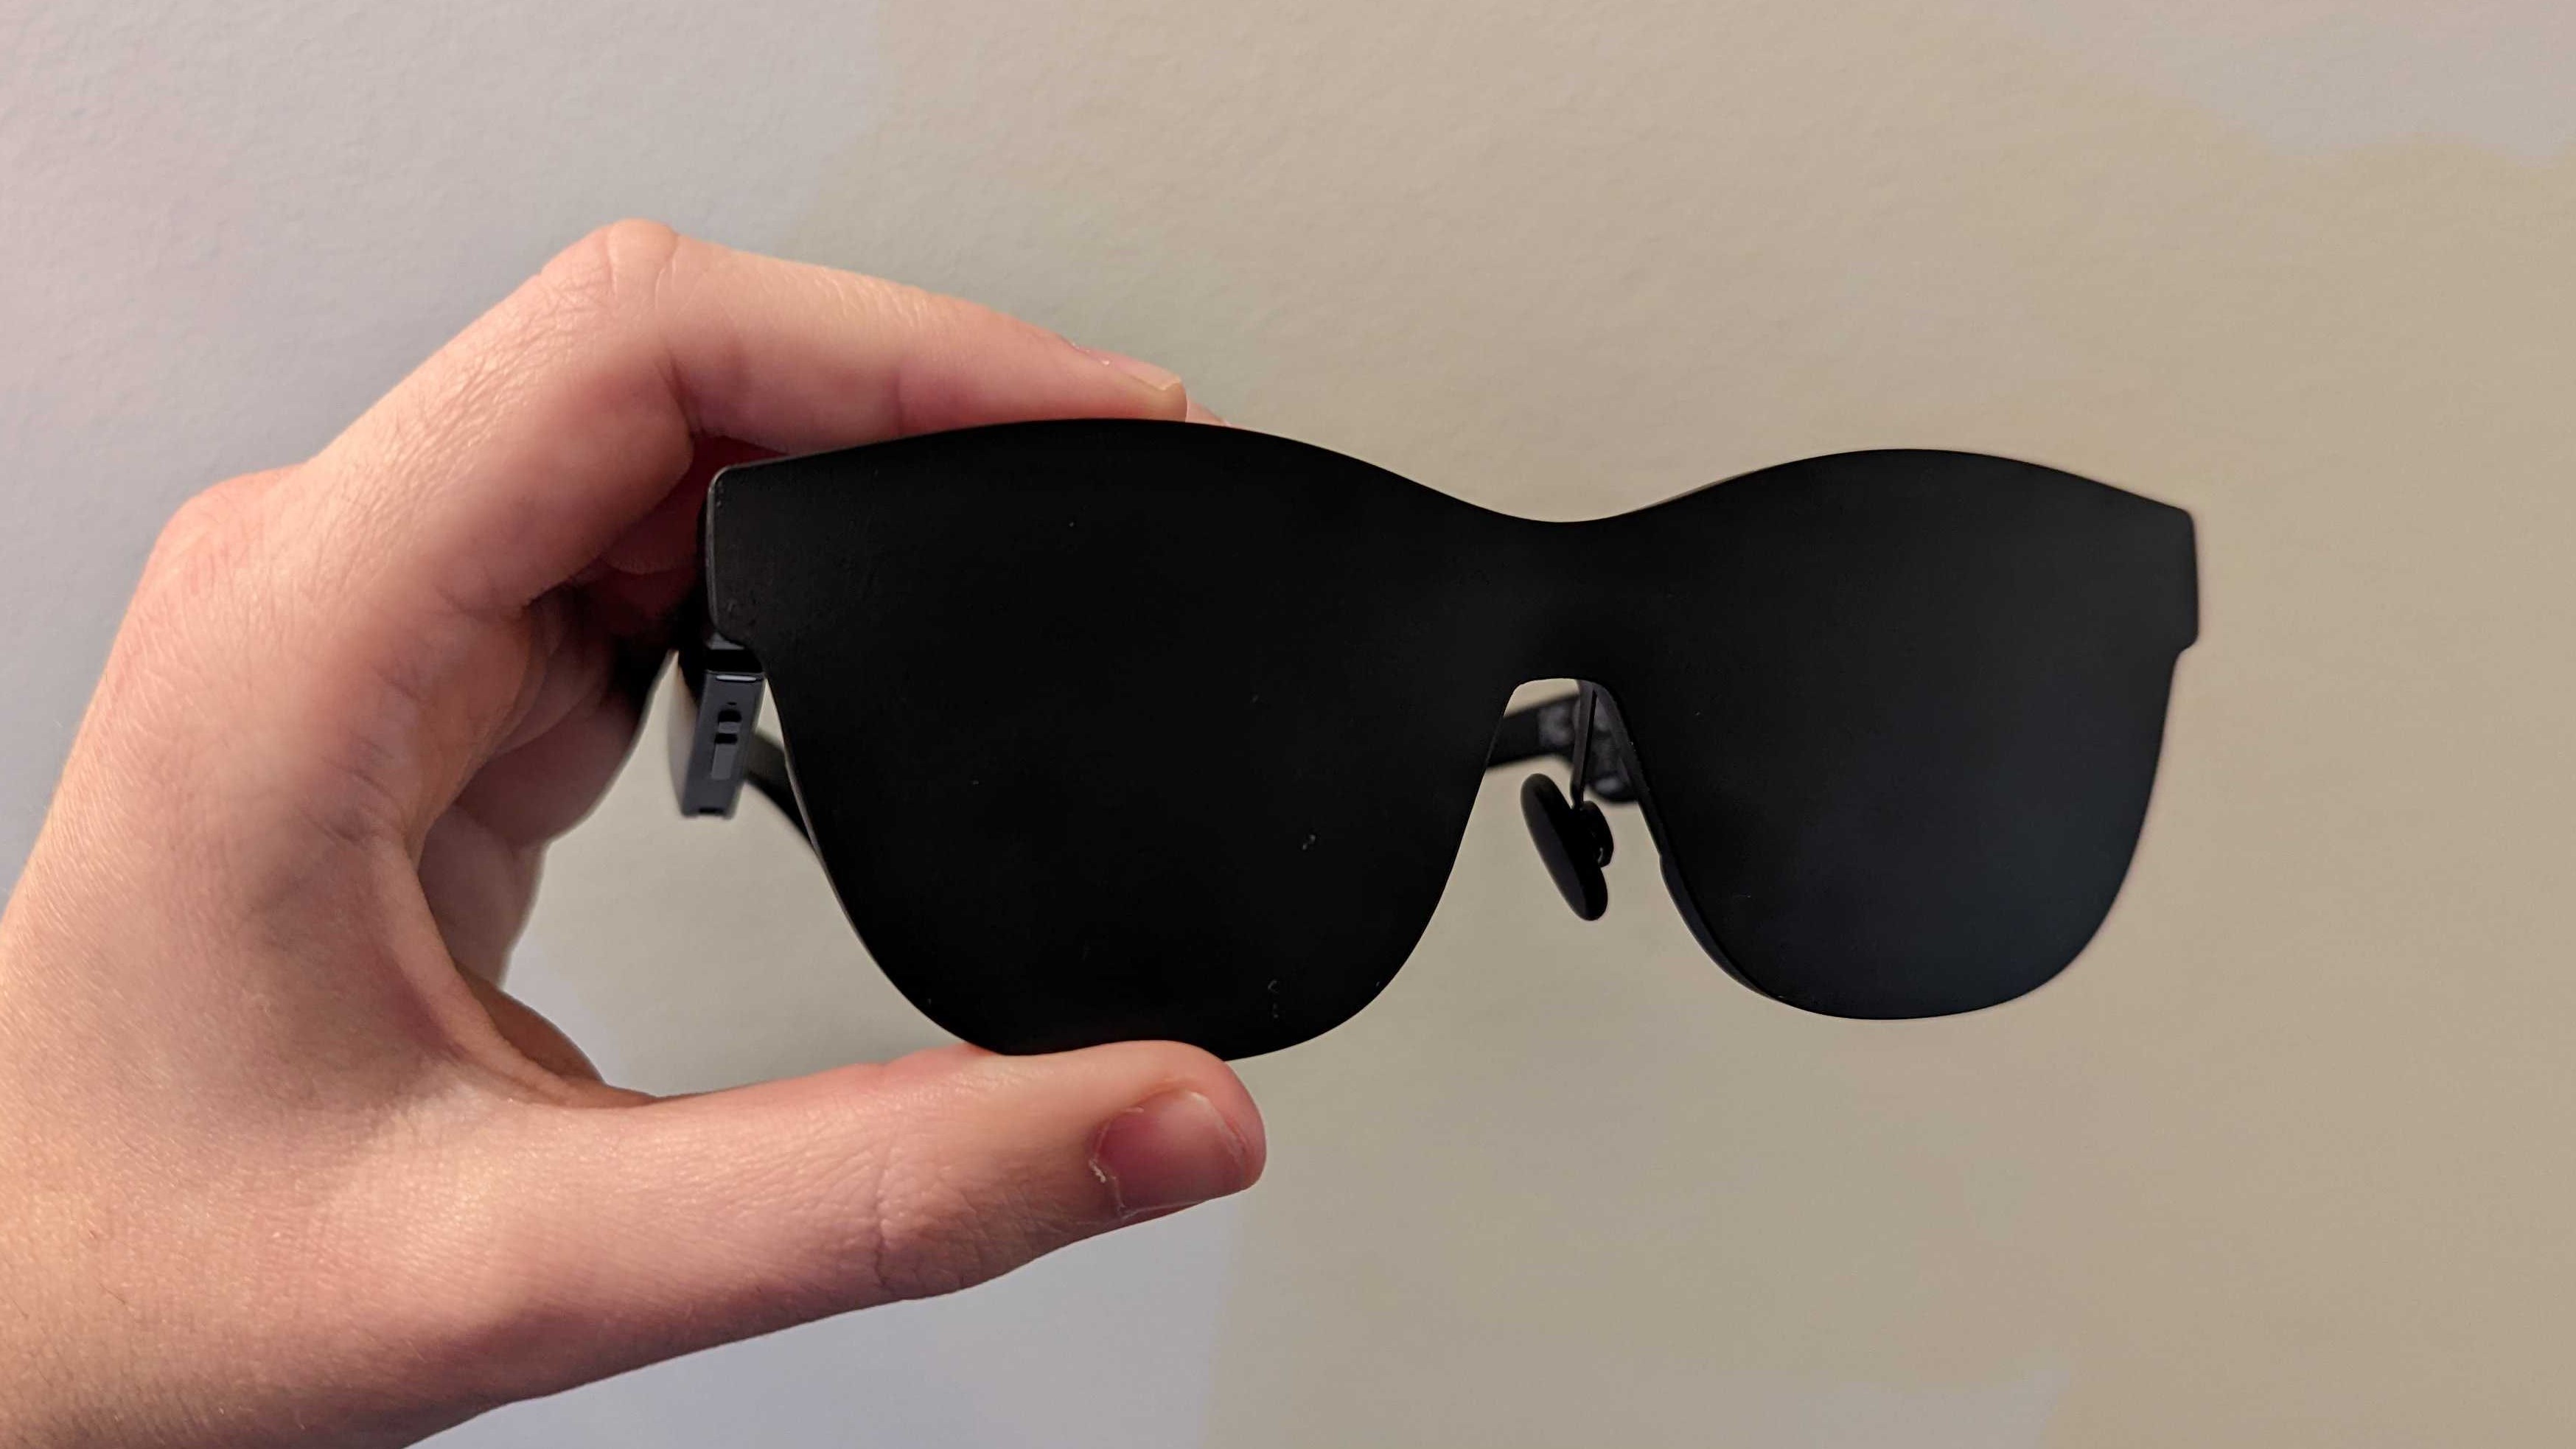 The AR Nreal Air glasses with the visor attached